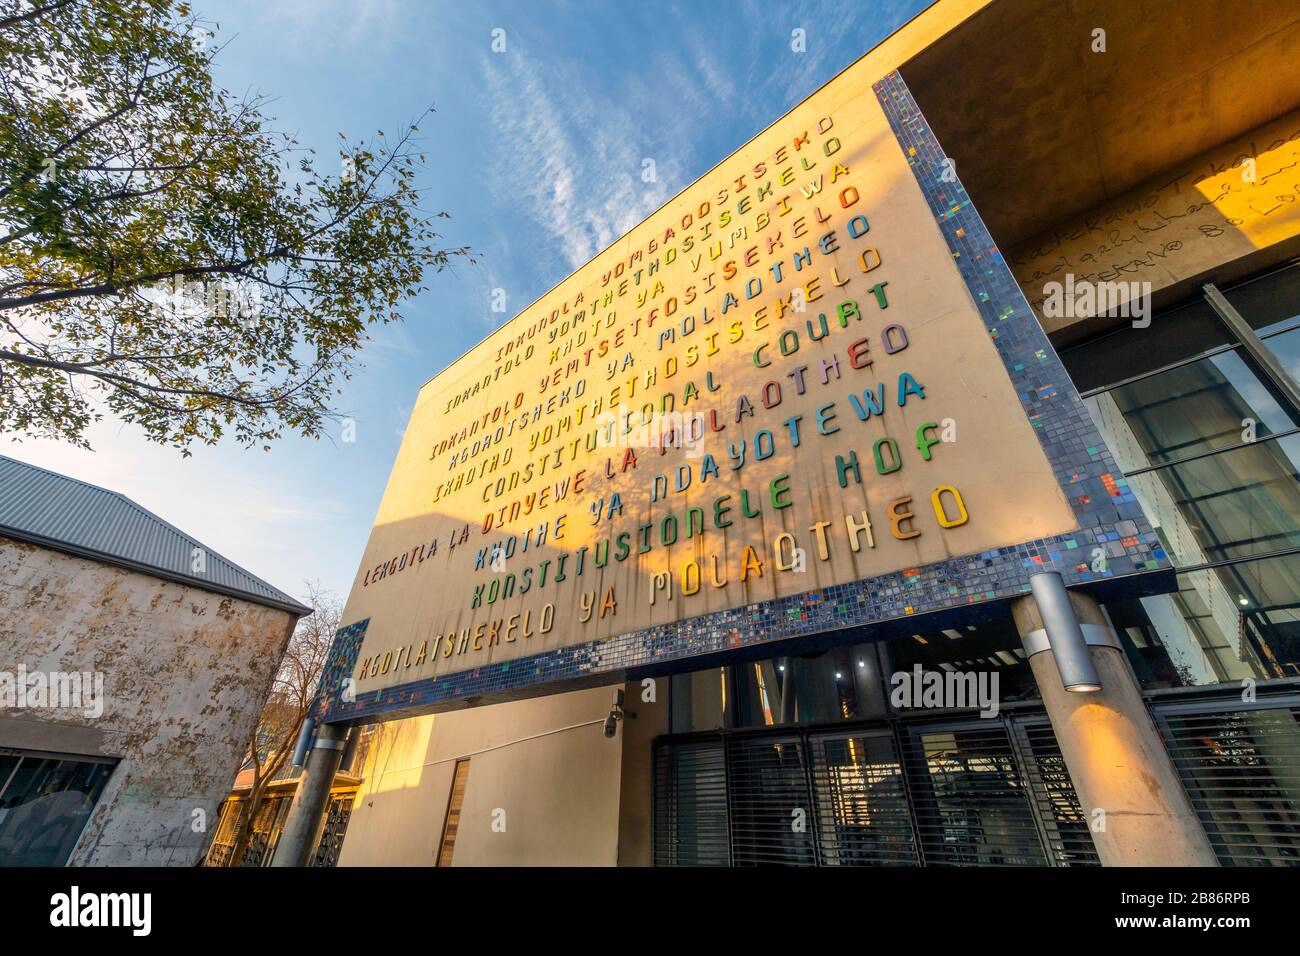 Johannesburg, South Africa - May 26, 2019: Facade of Constitutional Court of South Africa Stock Photo